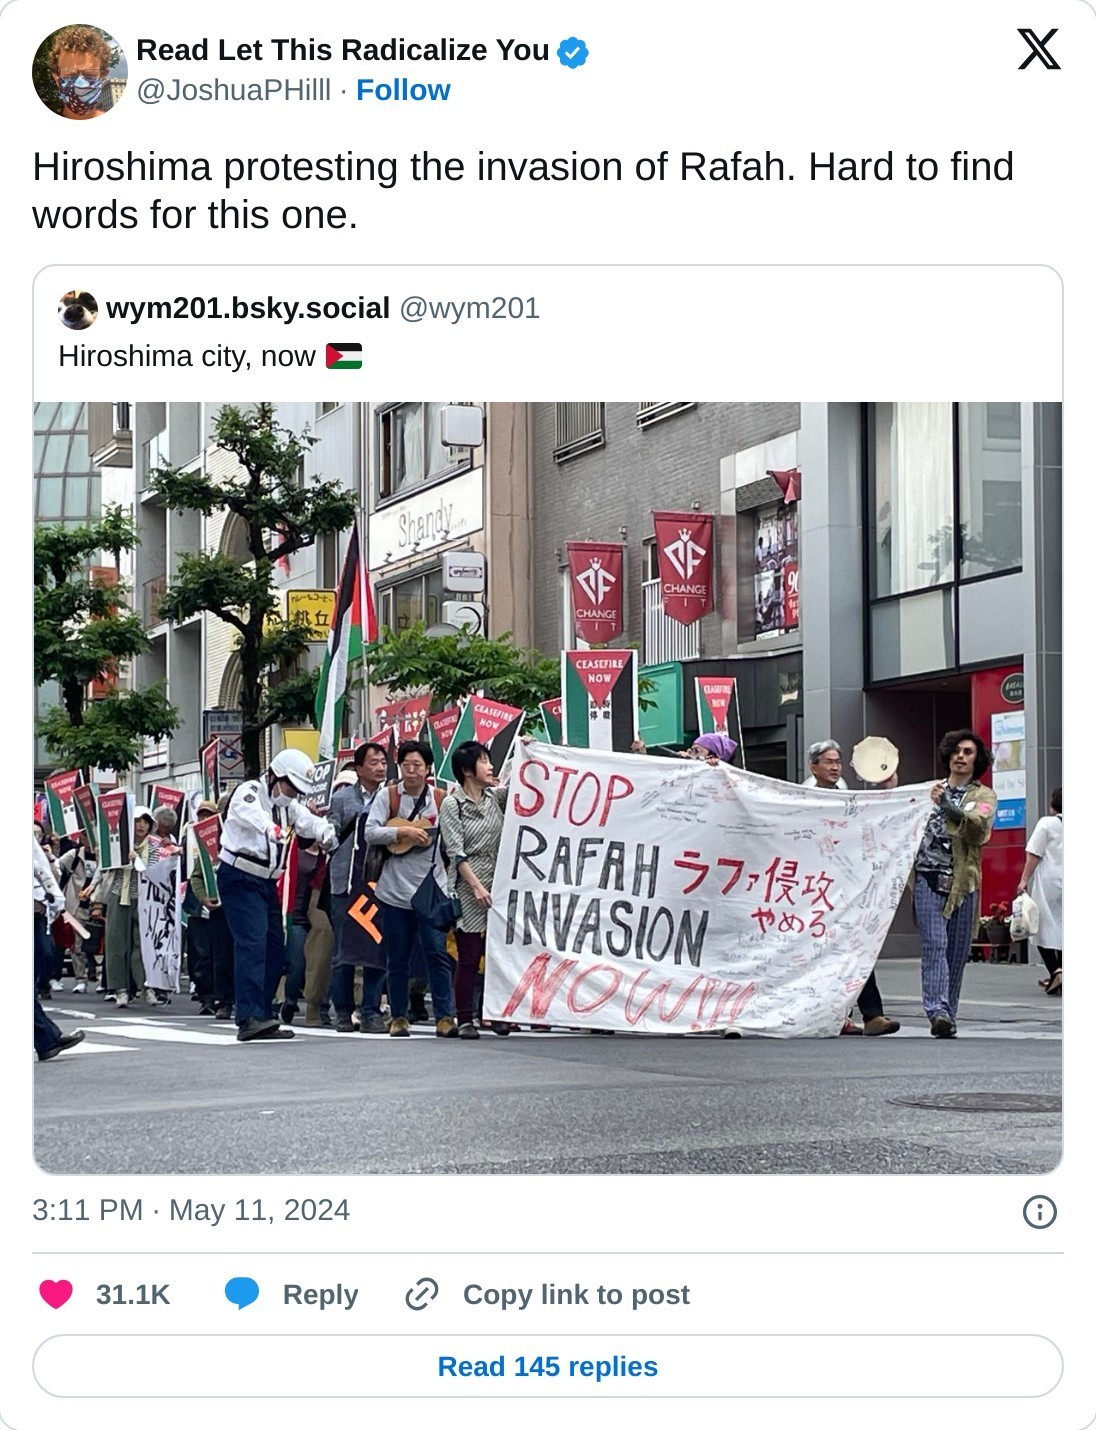 Hiroshima protesting the invasion of Rafah. Hard to find words for this one. https://t.co/mBQI3Z4wPx  — Read Let This Radicalize You (@JoshuaPHilll) May 11, 2024